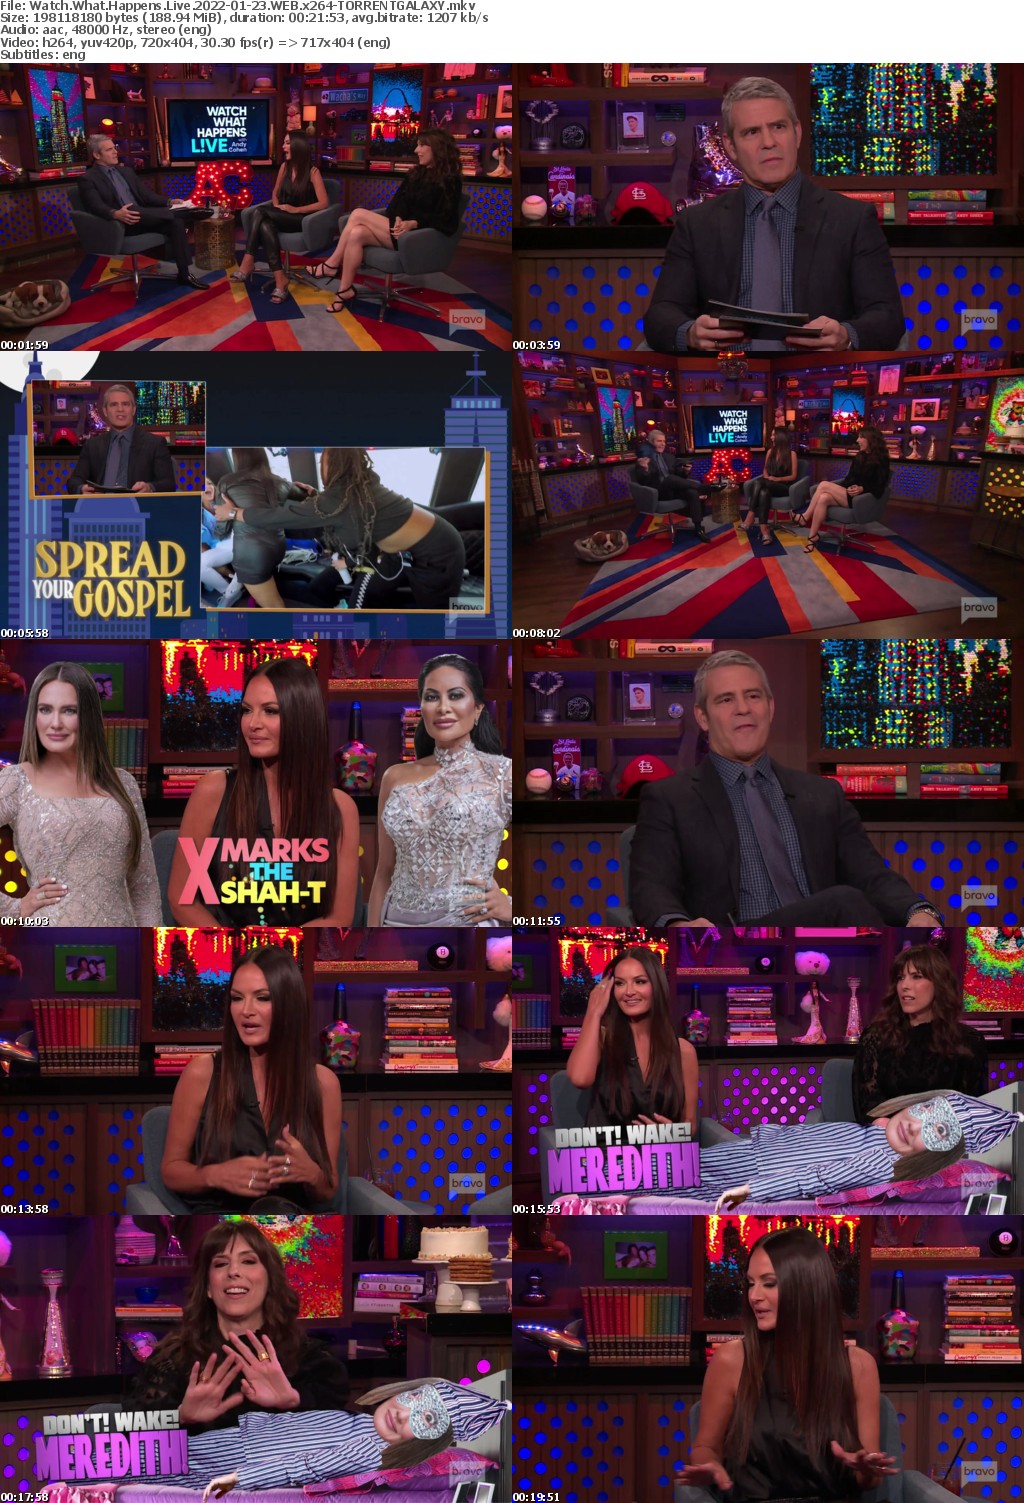 Watch What Happens Live 2022-01-23 WEB x264-GALAXY